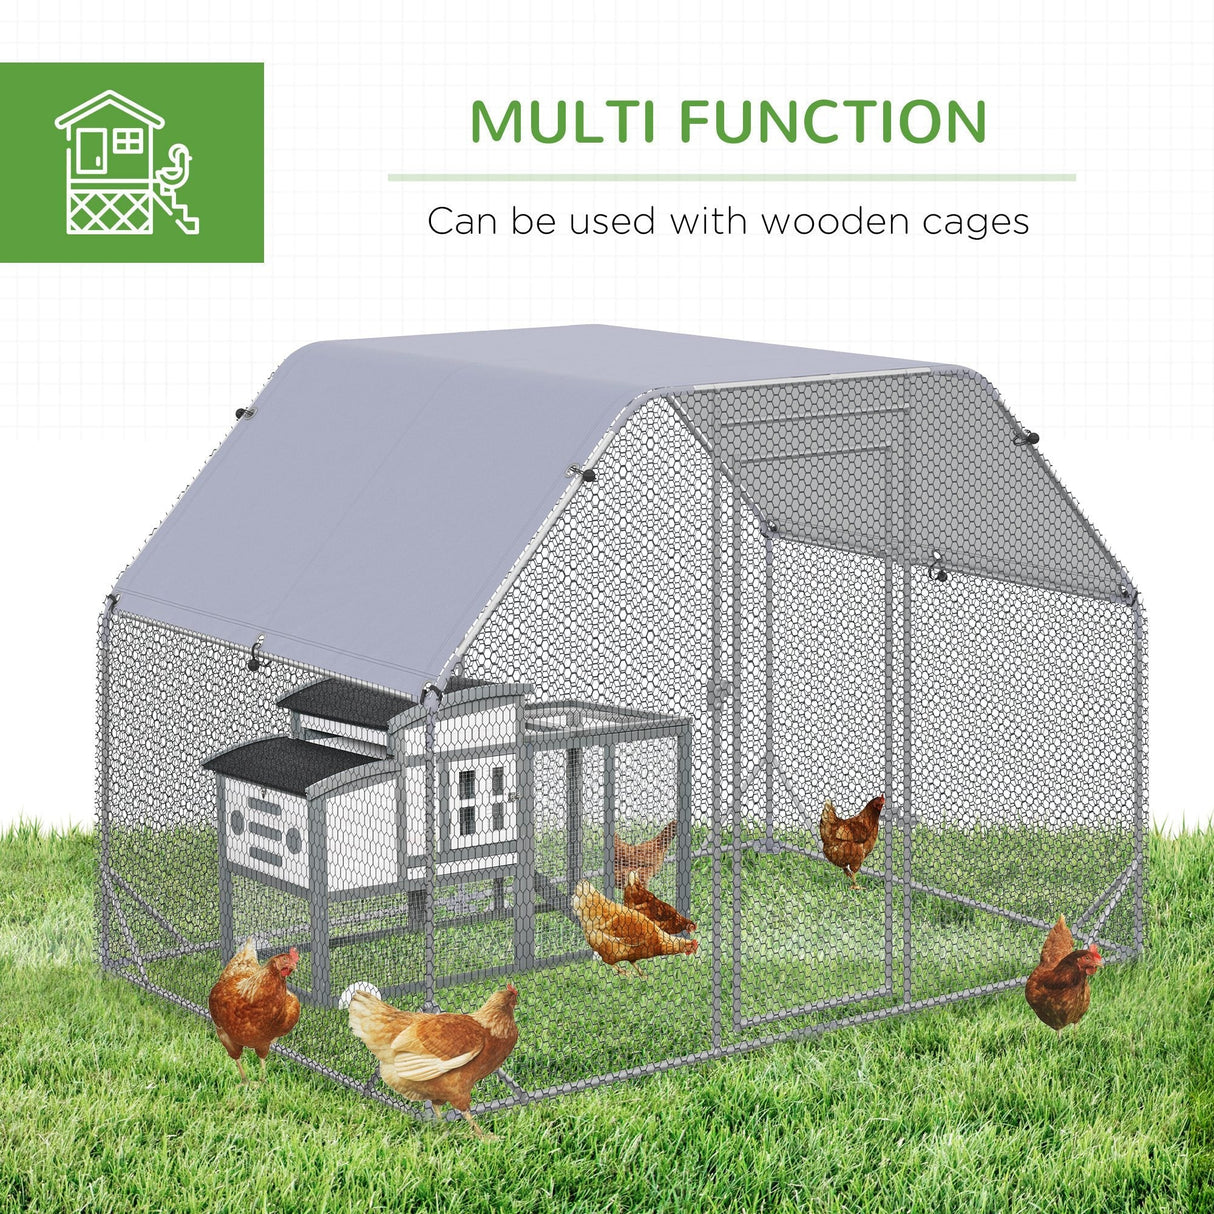 Spacious Chicken Run with Roof for 4-6 Birds - Walk In, PawHut,